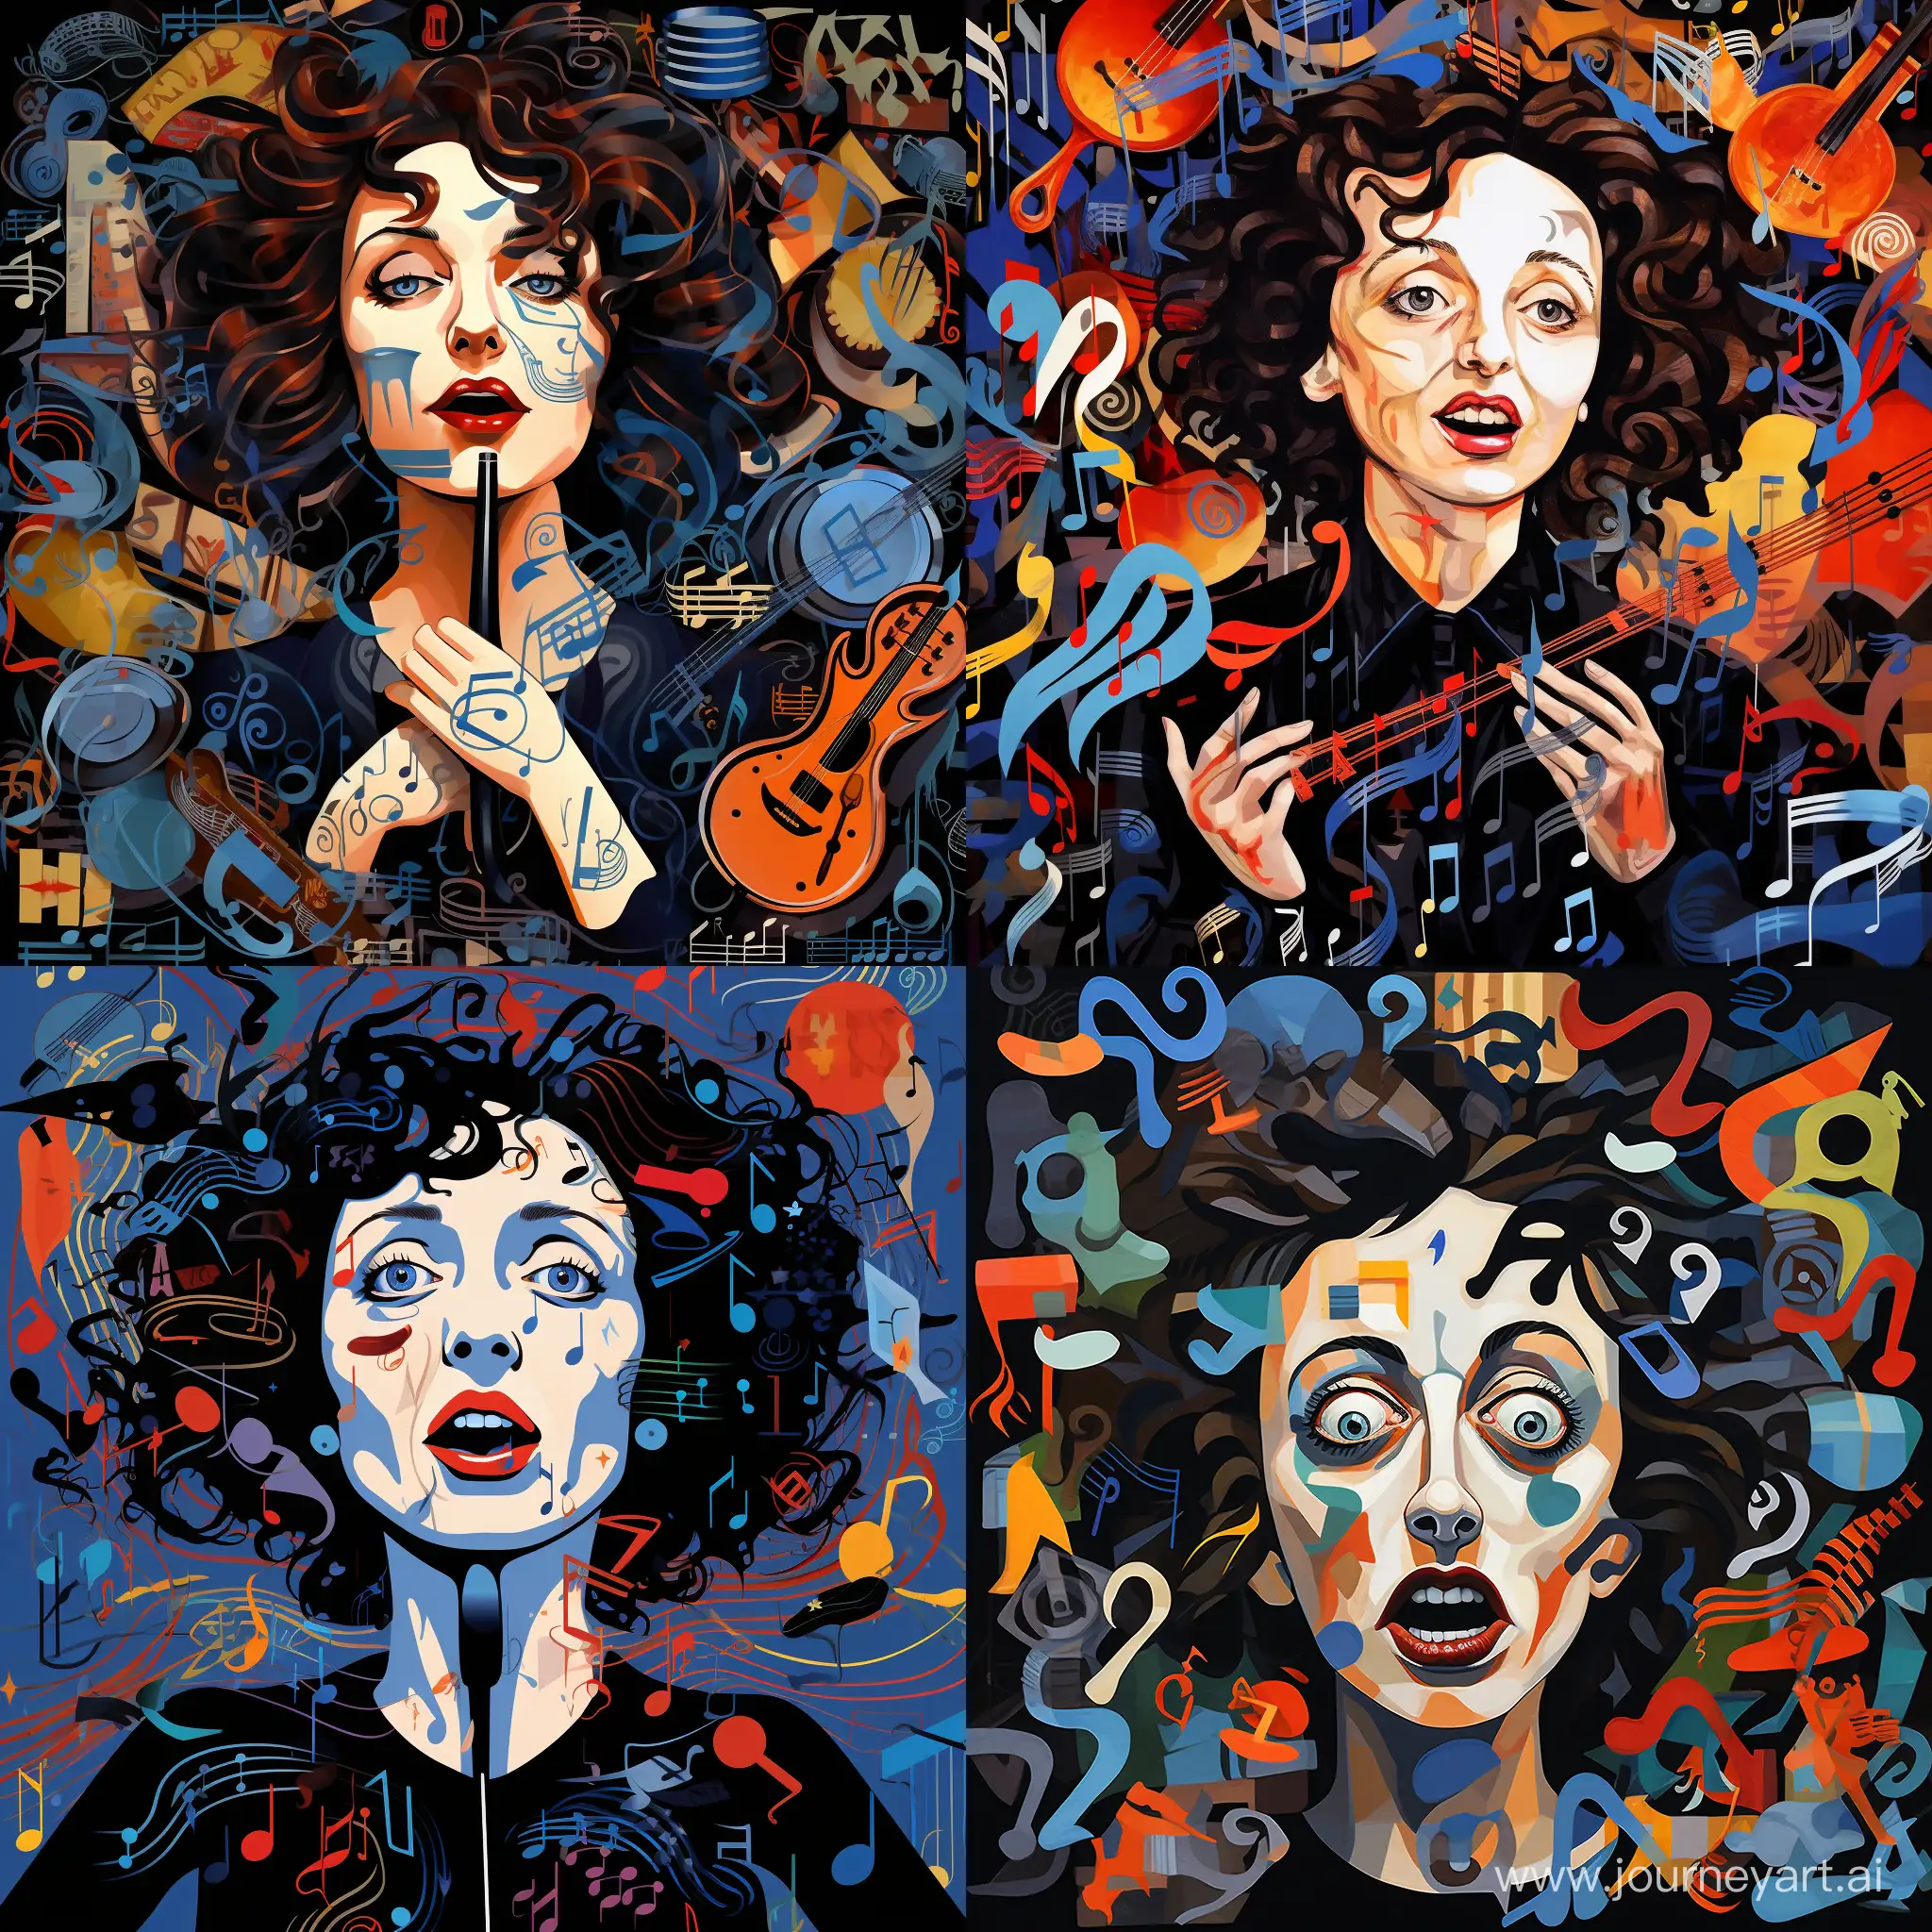 Waist portrait of Edith Piaf singing, surrounded by musical symbols, many details, complex dark colors, caricature, pop art style